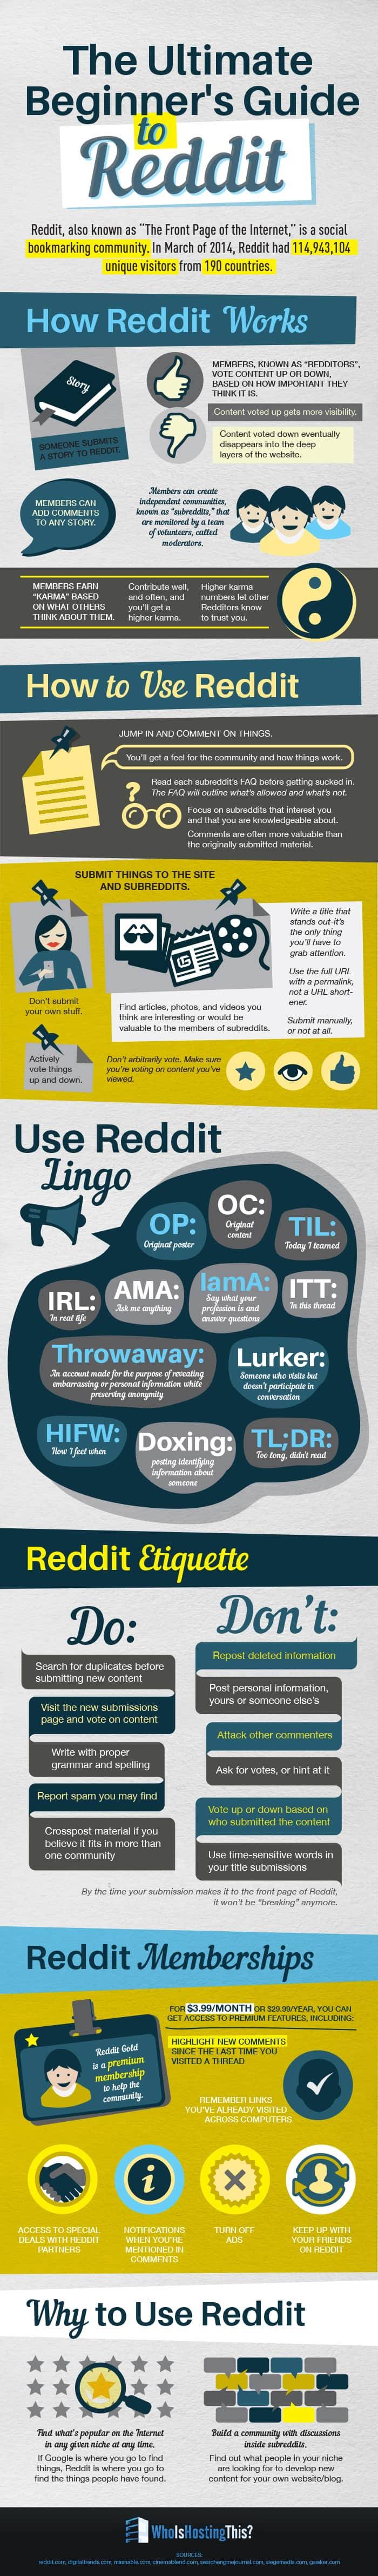 The Ultimate Beginner's Guide To Reddit - infographic